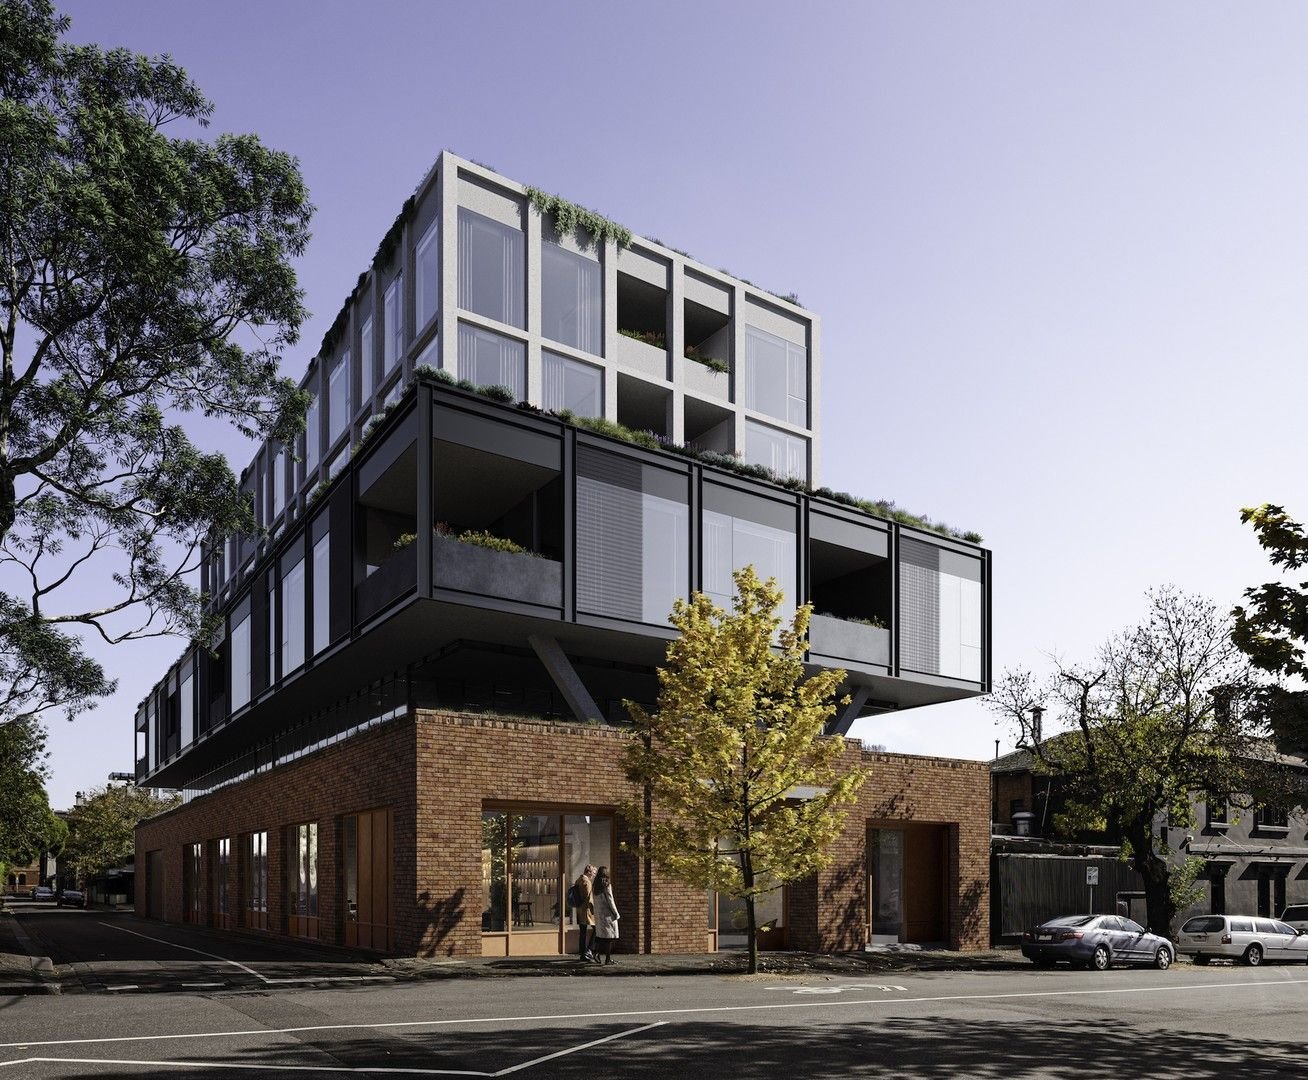 Fitzroy - Mclaren & Co - 341-347 George Street, Fitzroy, VIC 3068 - Townly - 3.jpg